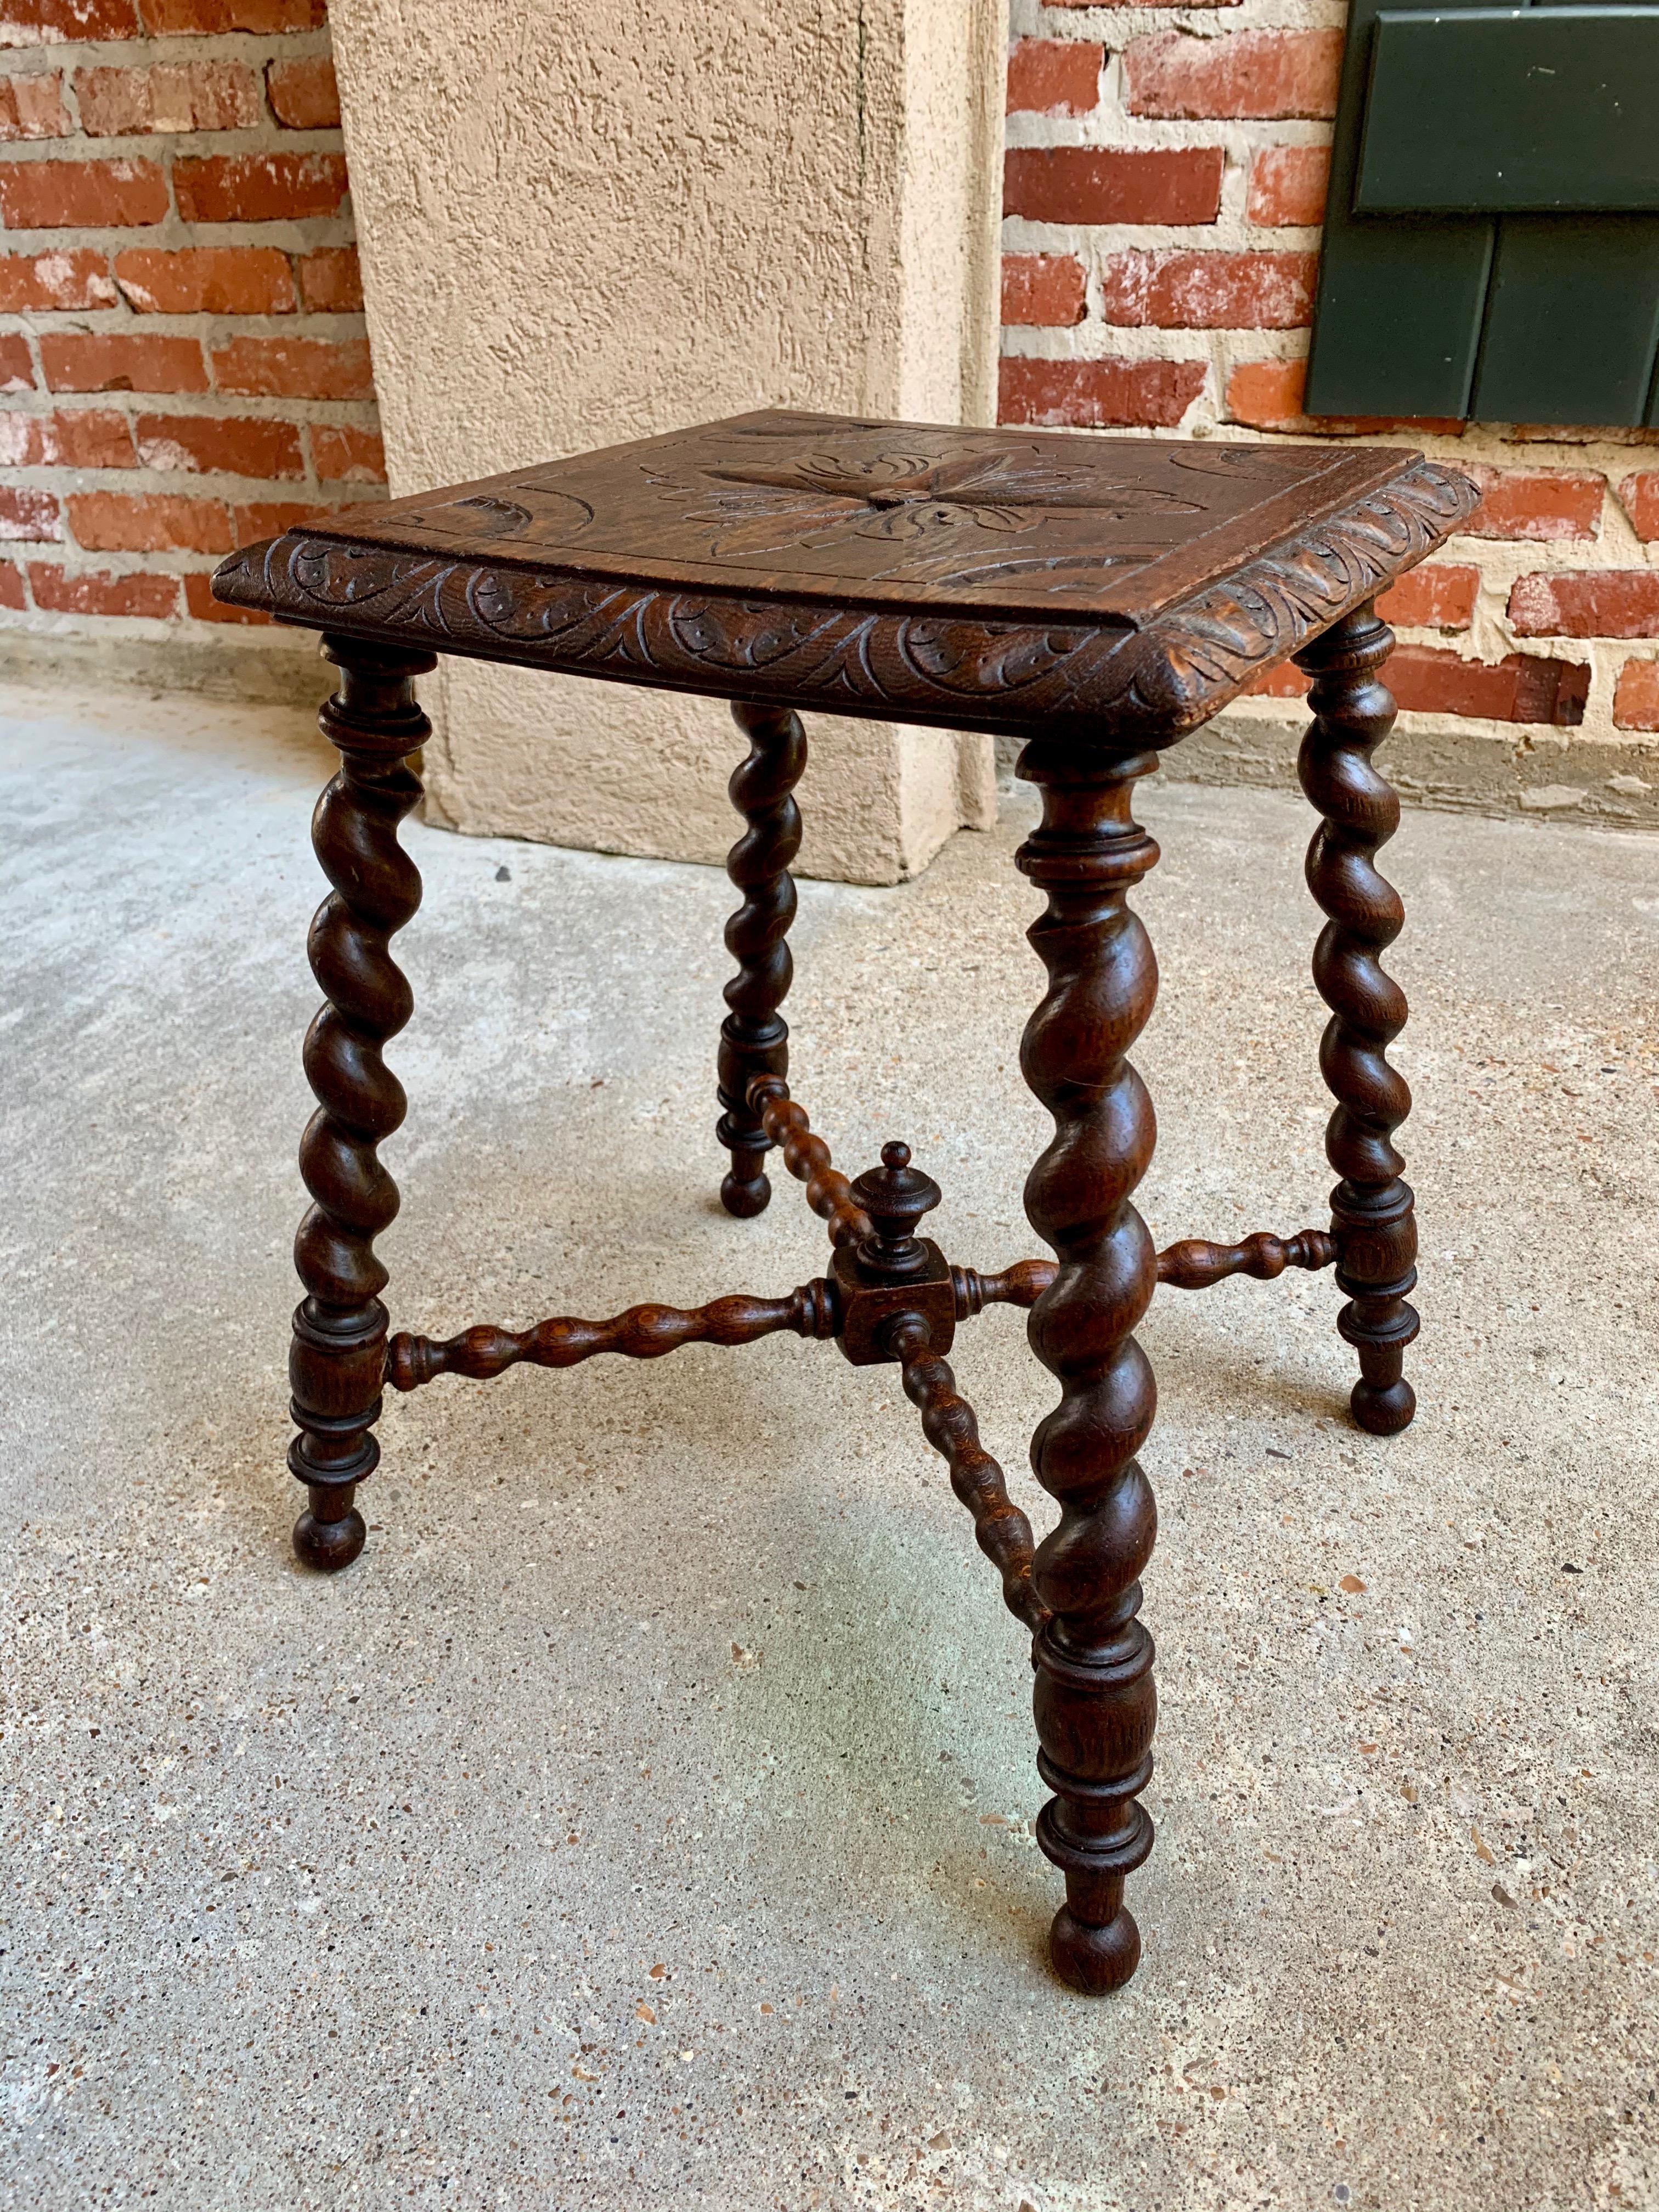 ~Direct from England~
~A beautiful antique English carved barley twist stool!~
~Tall and lovely, with splayed barley twist legs, loaded with quality craftsmanship from it’s ornately carved solid oak top (with carved beveled edges) all the way to